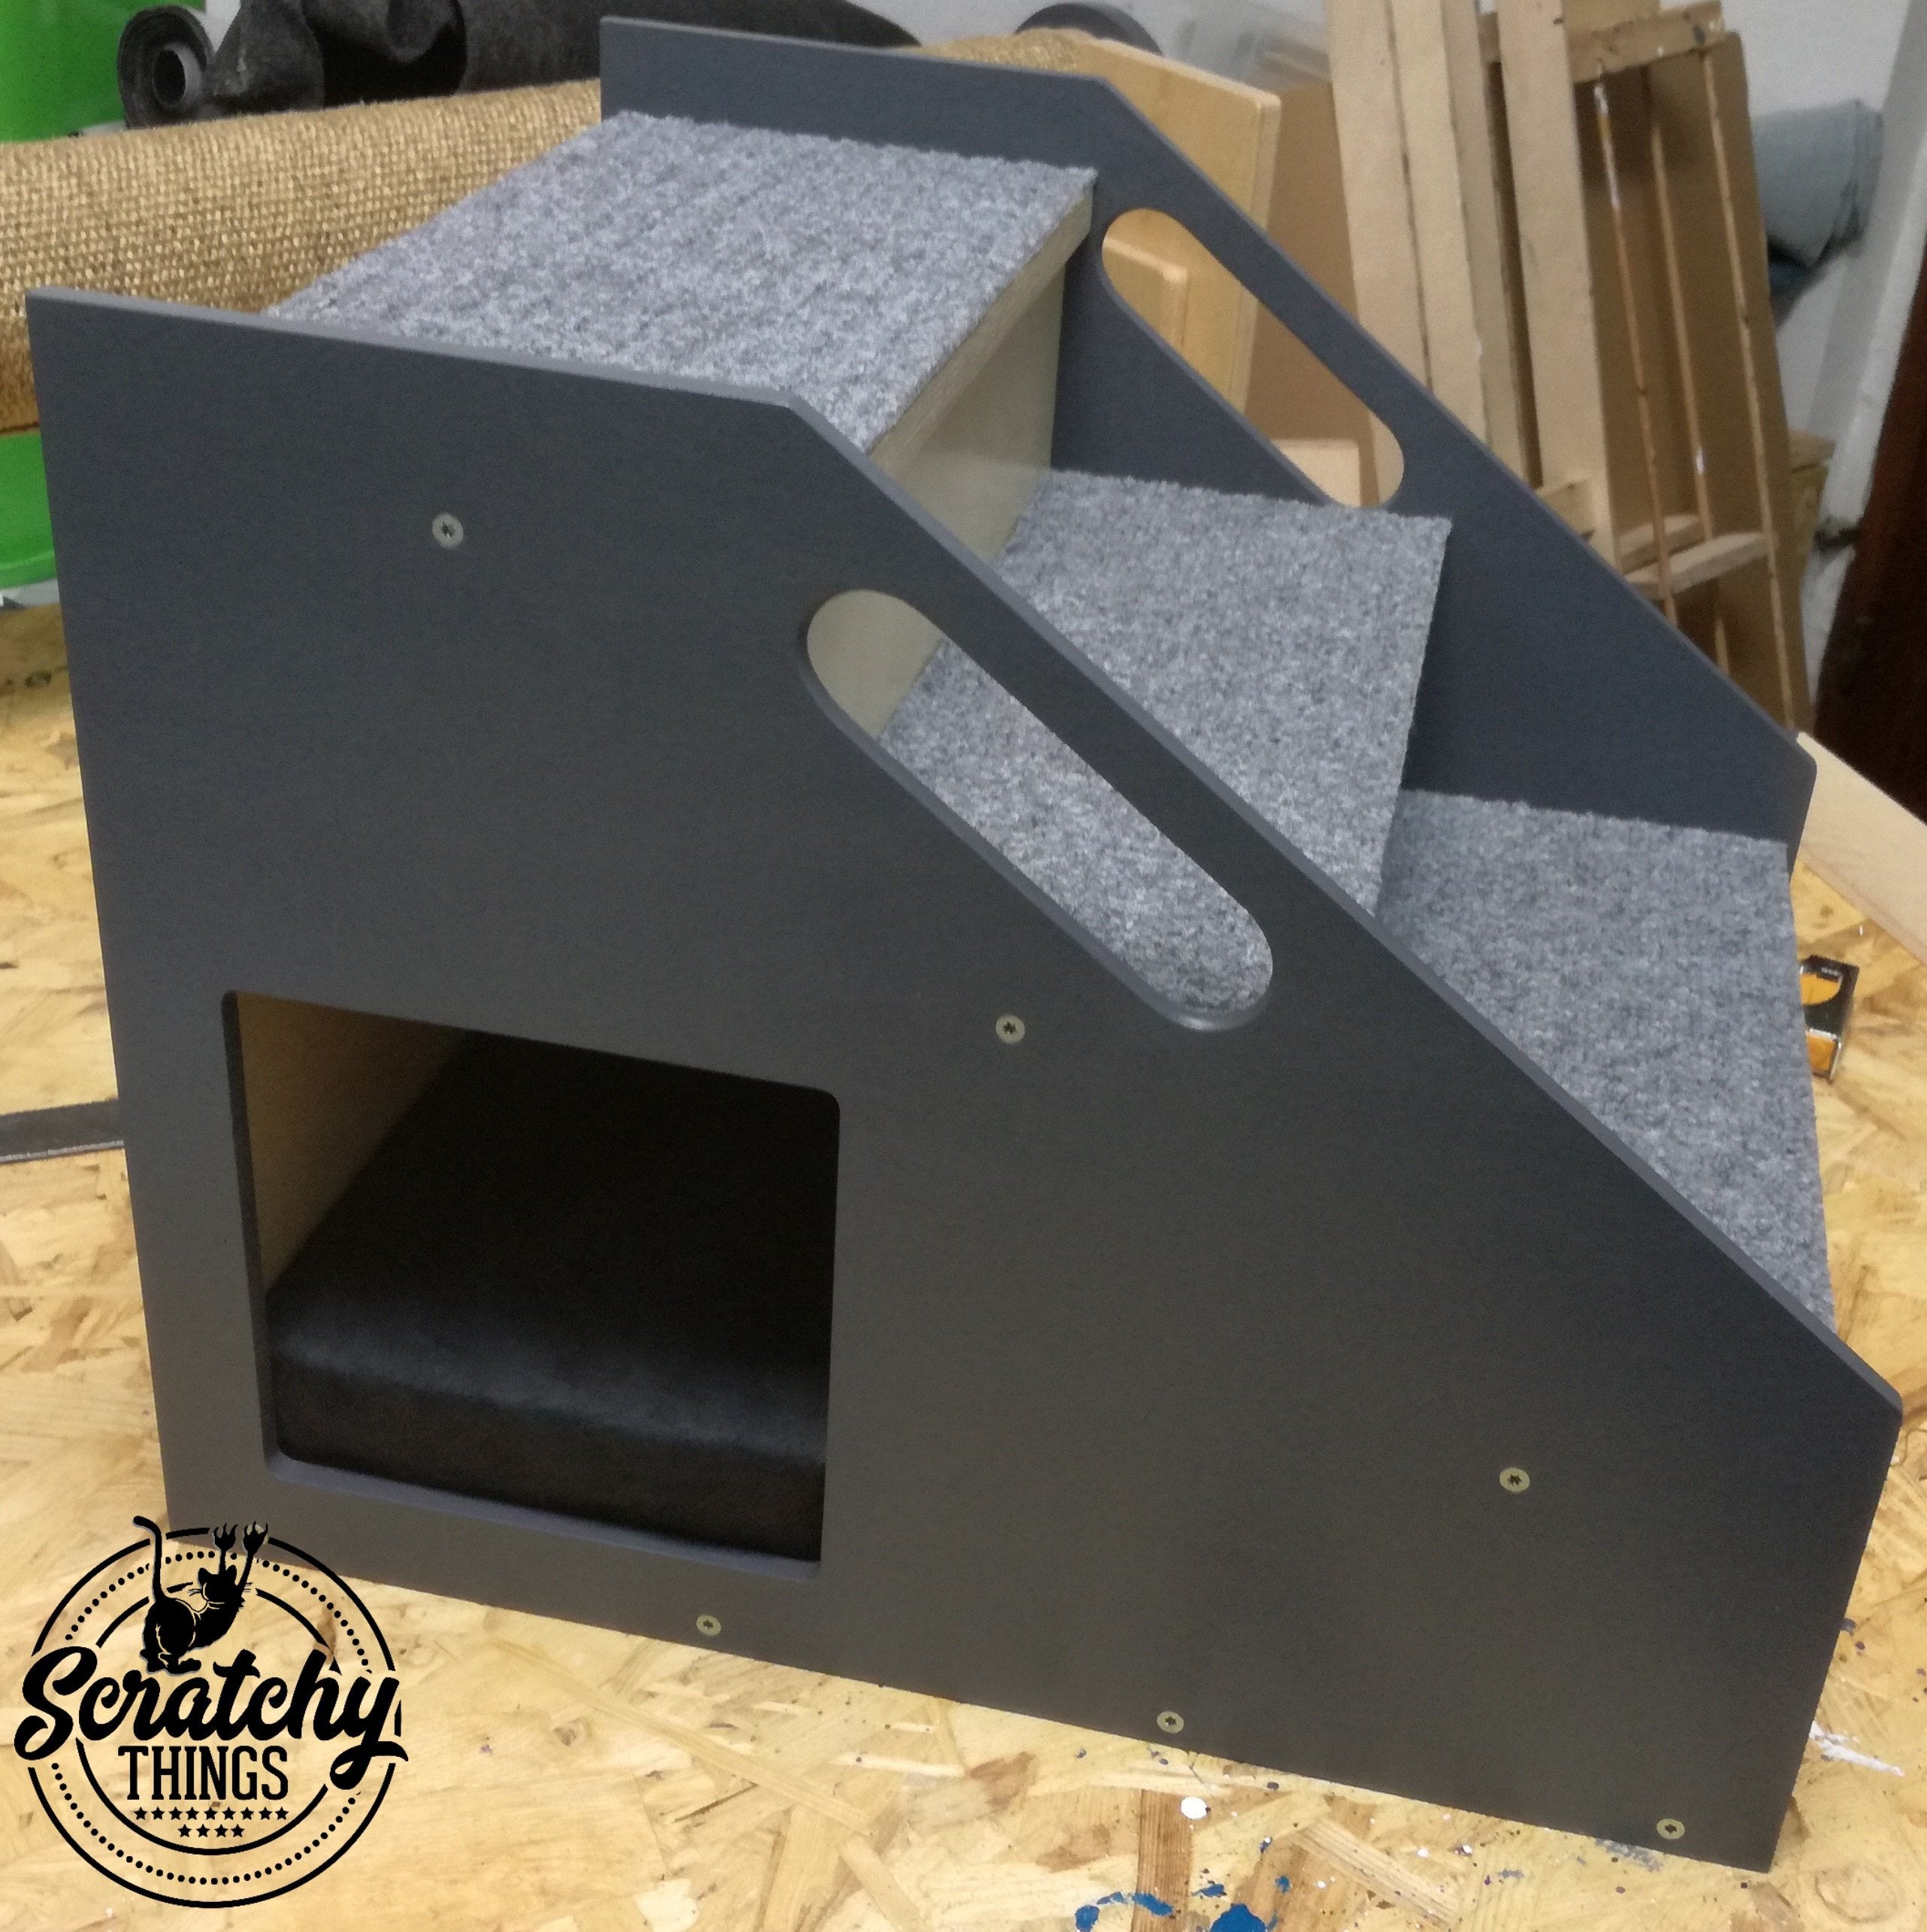 Cat Stairs Box House Bed - Boxy 3-Step - Scratchy Things Premium Pet Furniture